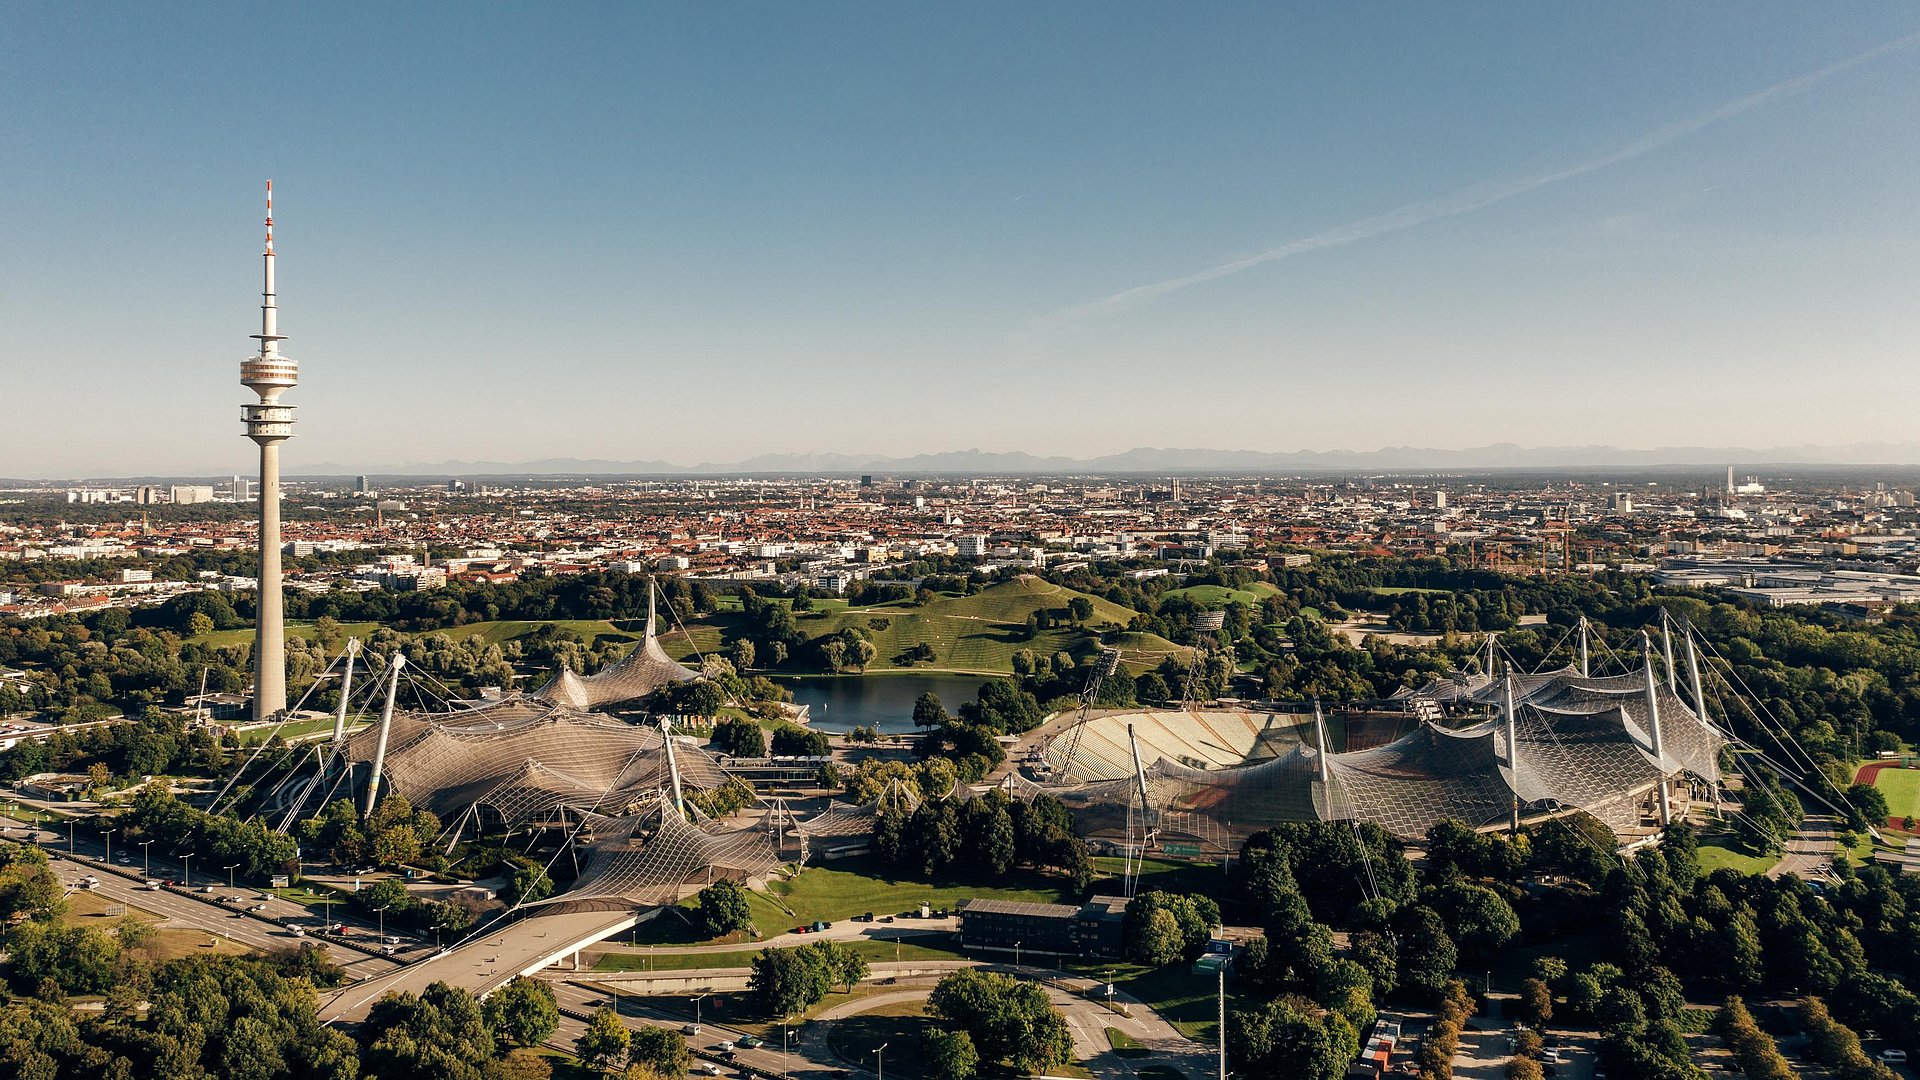 View of the Olympiapark from above.